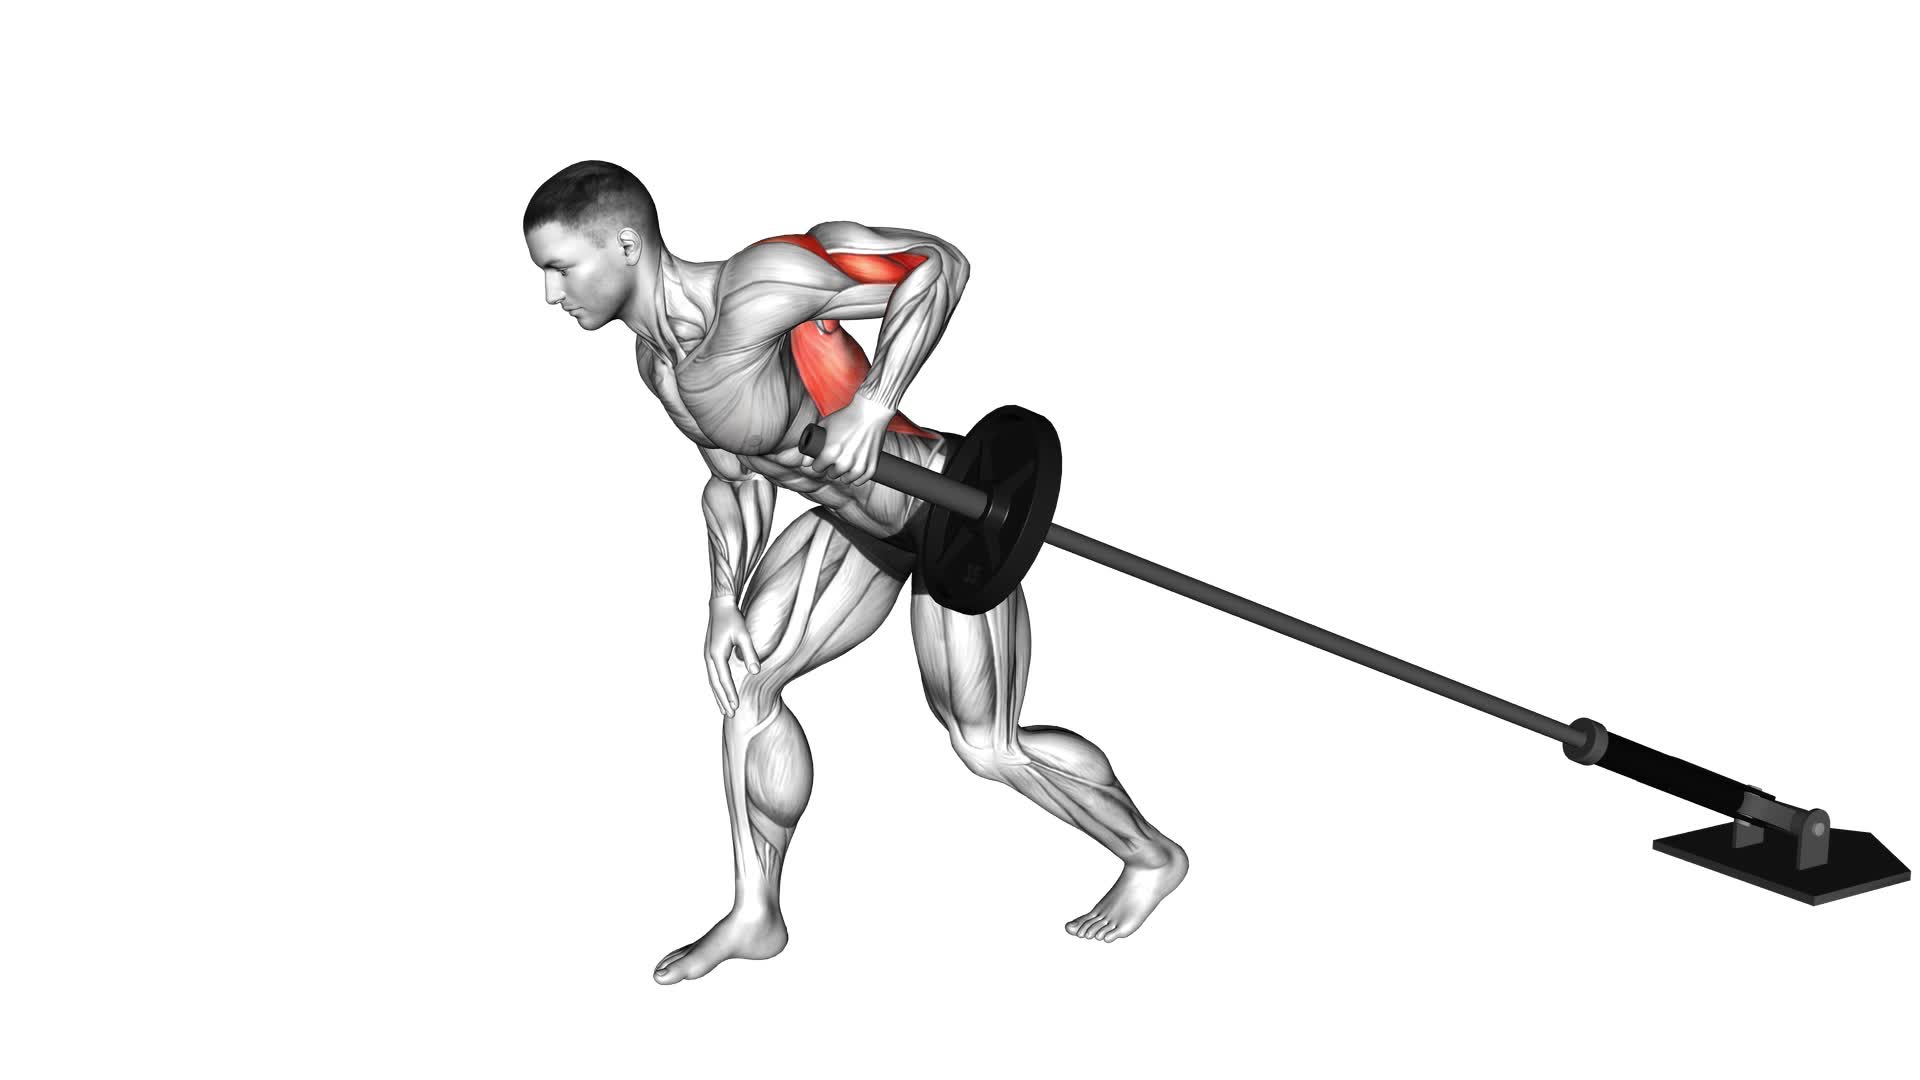 Barbell One Arm Bent Over Row - Video Exercise Guide & Tips